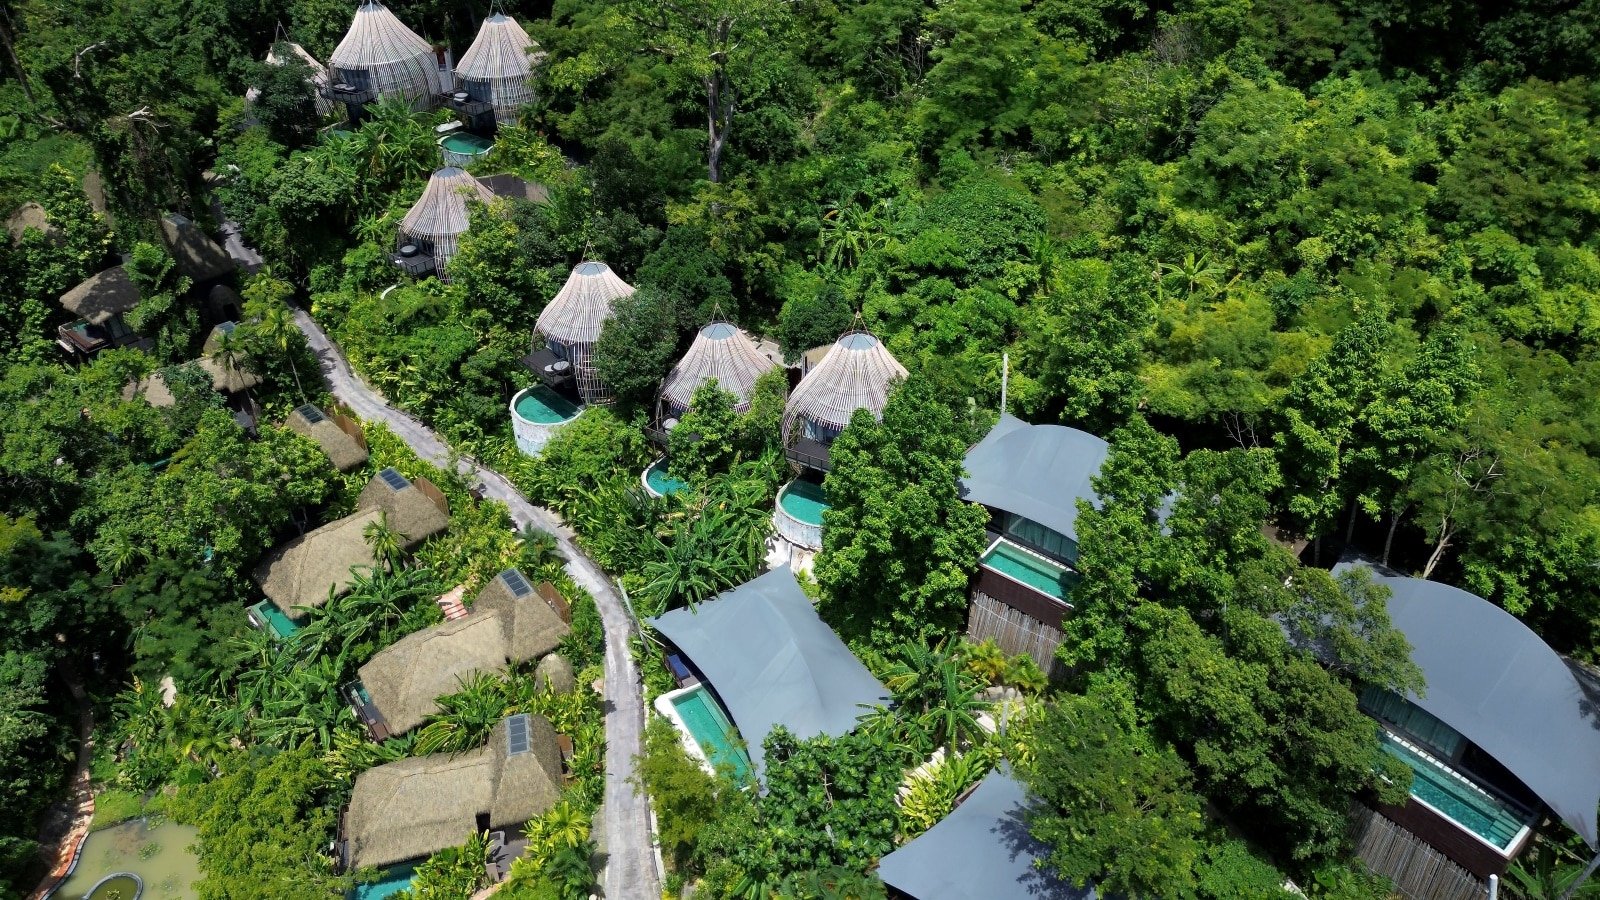 <p><span>Keemala in Phuket is not just a resort but a sanctuary tucked away in the lush hillsides of Thailand. The treehouse villas here blend traditional Thai culture and modern amenities, each with a private pool and stunning views. Keemala focuses on holistic wellness, offering spa treatments, yoga sessions, and organic dining experiences.</span></p> <p><span>The resort’s philosophy is about well-being and harmony with nature, making it a perfect getaway for those seeking relaxation and rejuvenation. The treehouse villas, nestled amidst the tropical forest, provide a peaceful retreat from the world.</span></p> <p><b>Insider’s Tip: </b><span>Try holistic activities like Thai Chi or meditation for a rejuvenating experience.</span></p> <p><b>When To Travel: </b><span>Visit from November to April for the best weather.</span></p> <p><b>How To Get There: </b><span>Fly to Phuket International Airport and then drive to Keemala.</span></p>